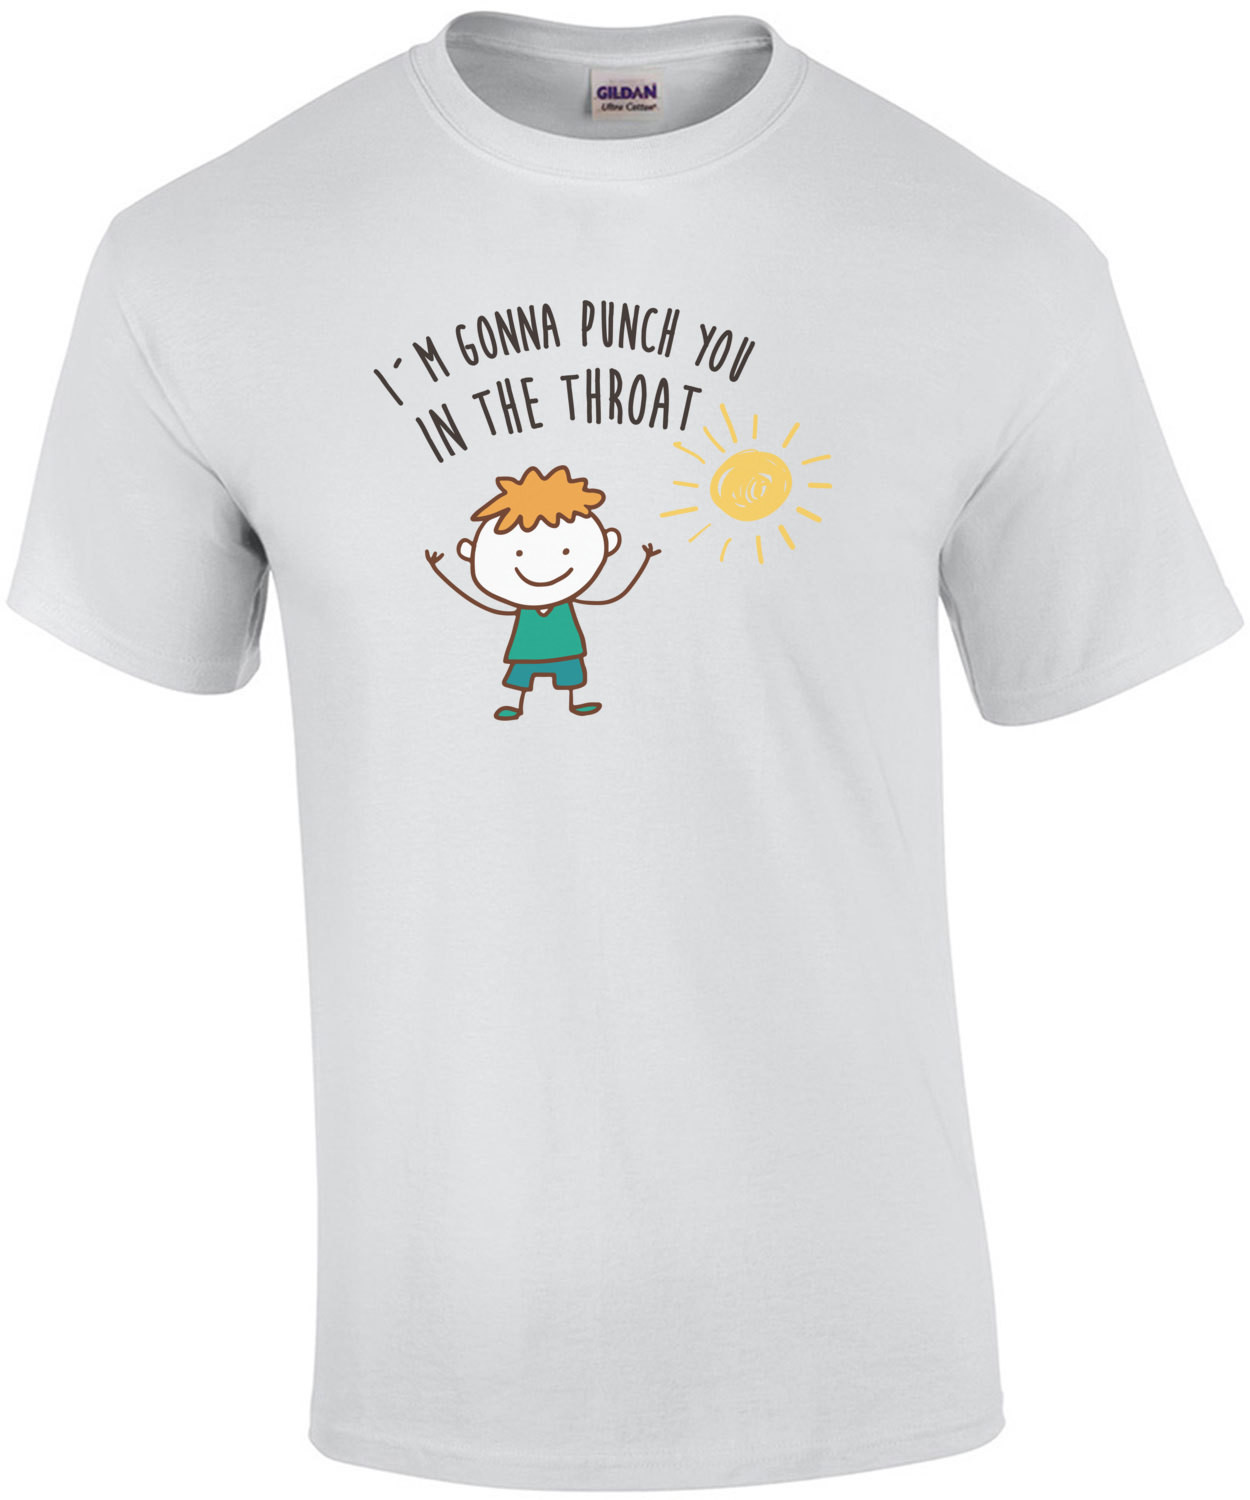 I'm gonna punch you in the throat - funny t-shirt